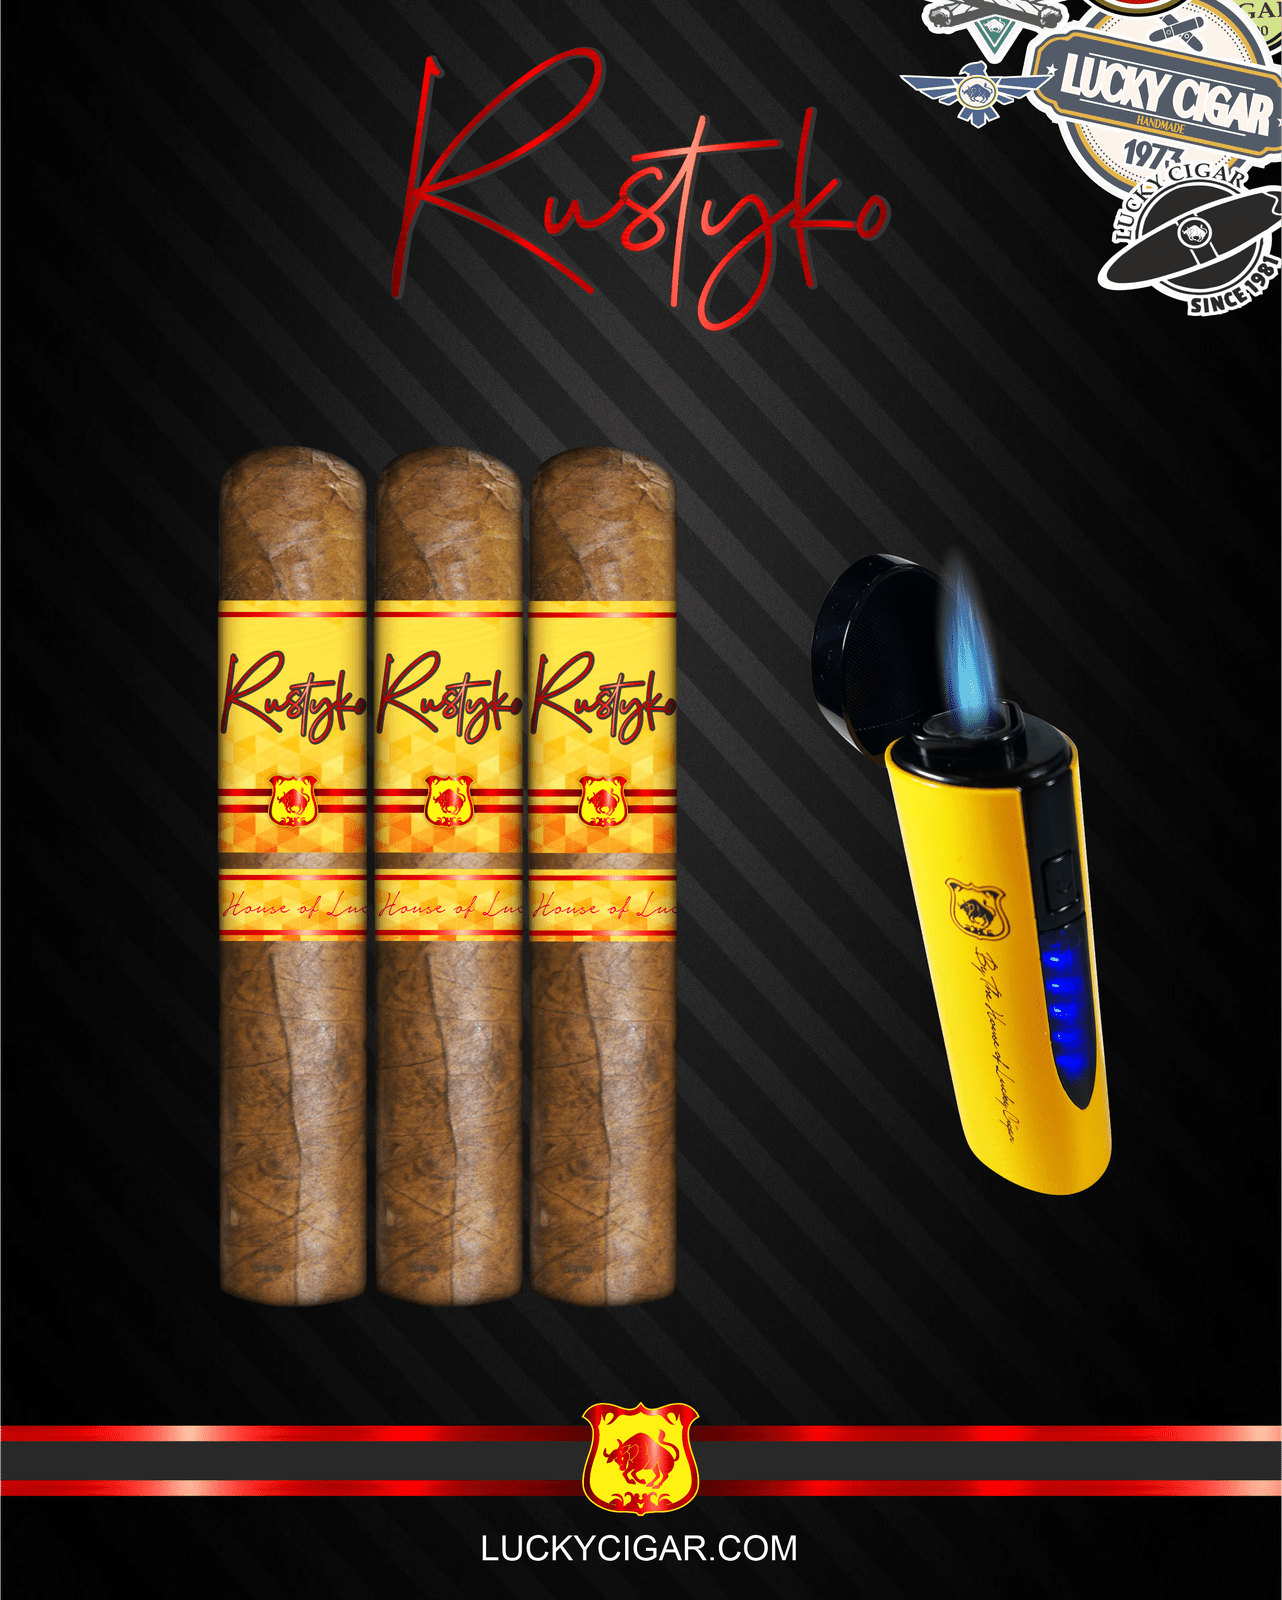 Infused Cigars: Rustyko Robusto 5x54 Cigars - Set of 3 with Torch